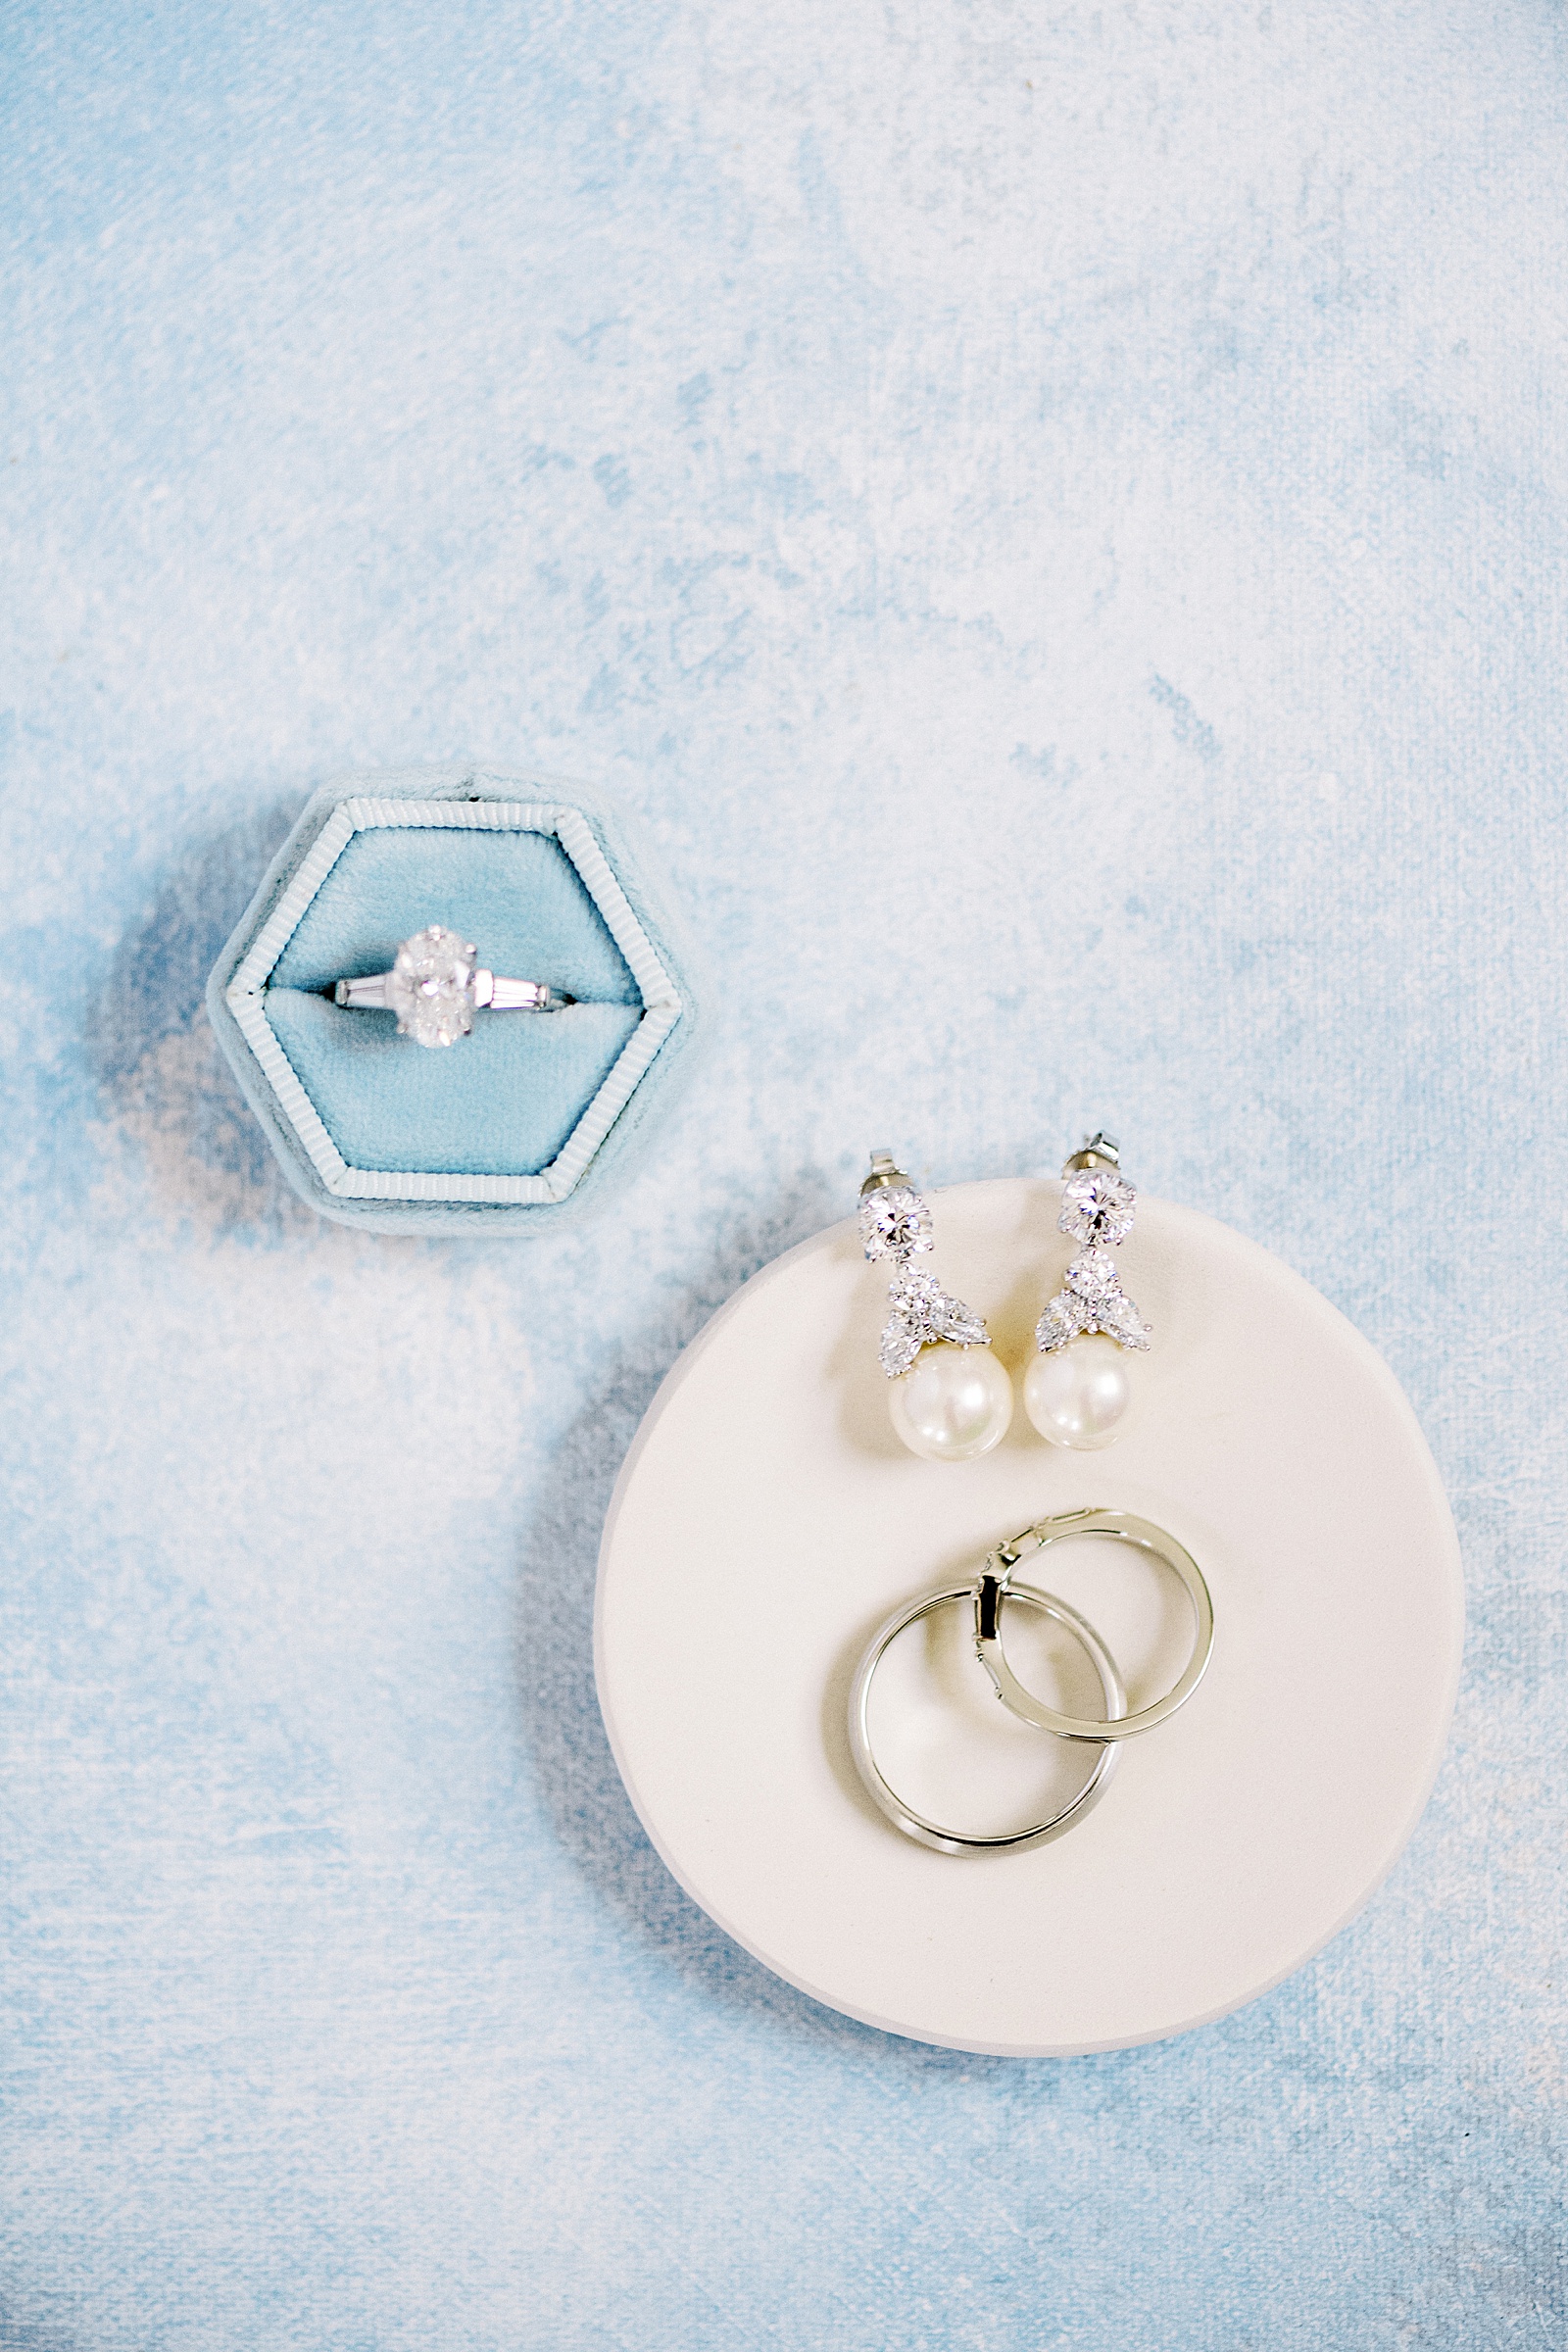 Rings and earrings lying on a blue background for coastal New York wedding